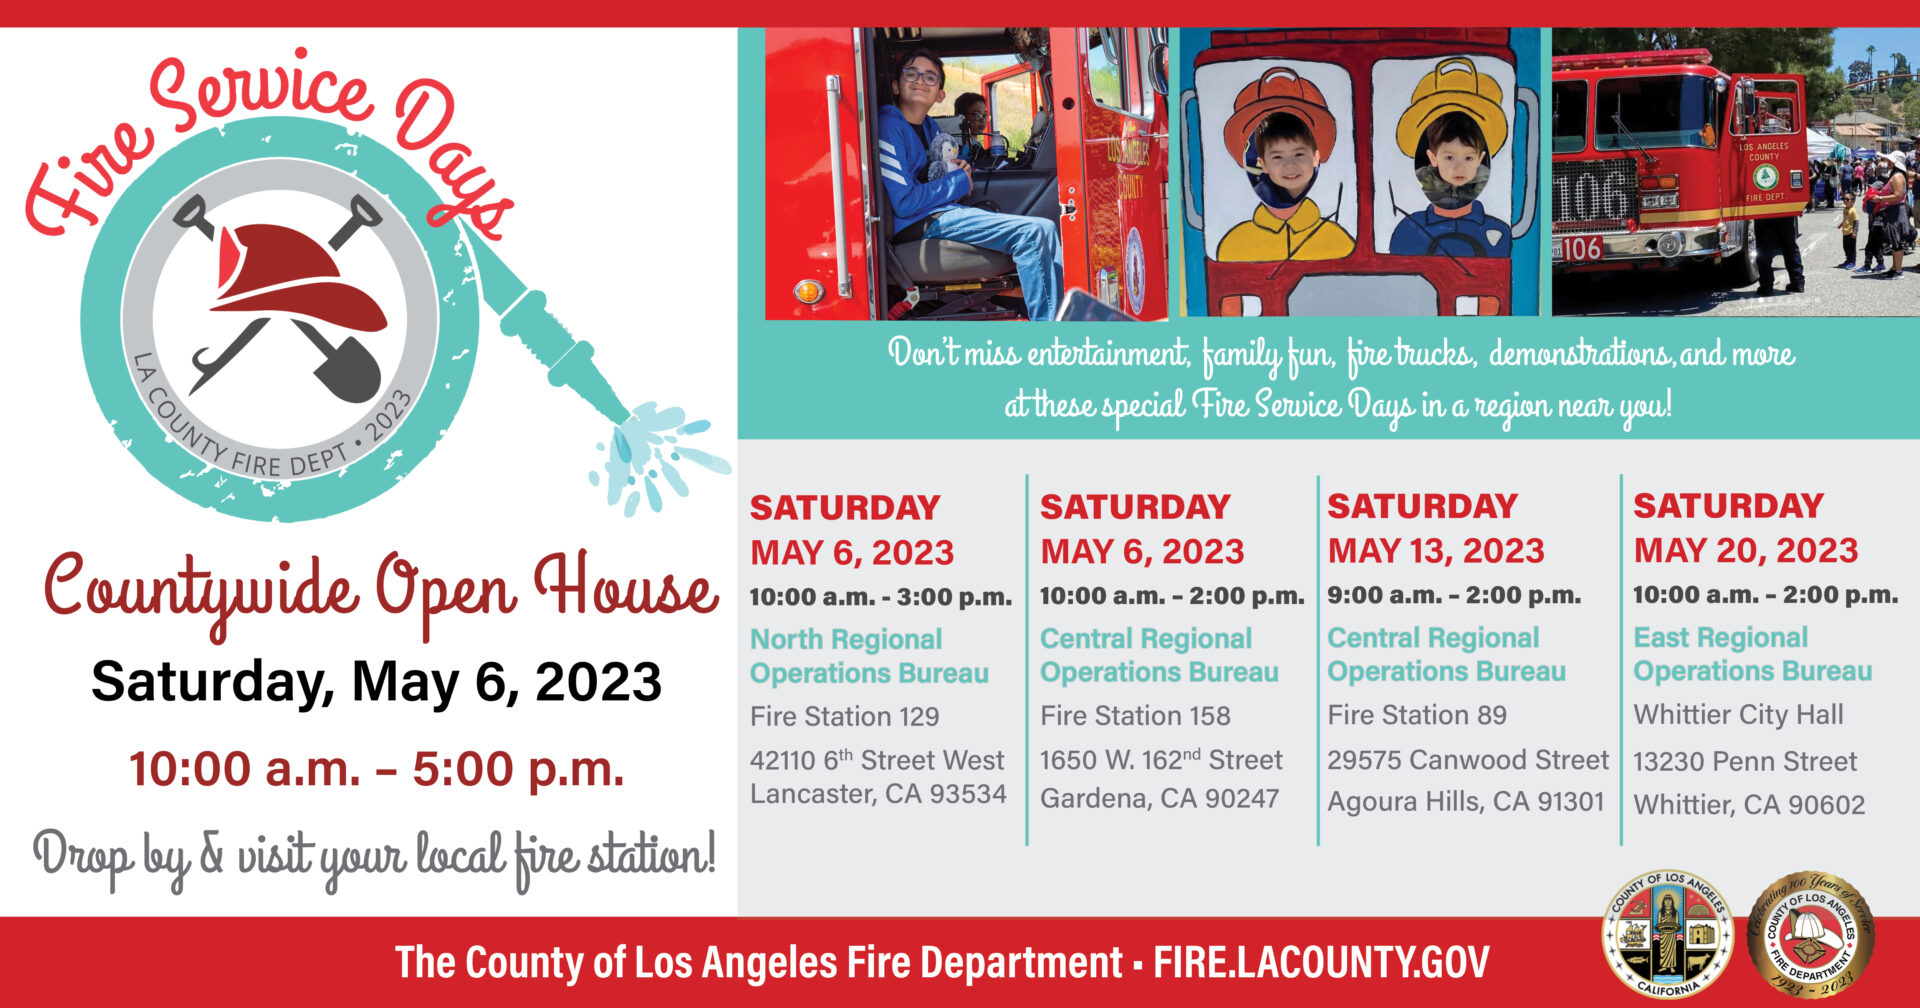 On Saturday, May 6, 2023, the Los Angeles County Fire Department’s (LACoFD) 174 fire stations will roll up their doors and welcome residents as part of the annual Countywide Open House.